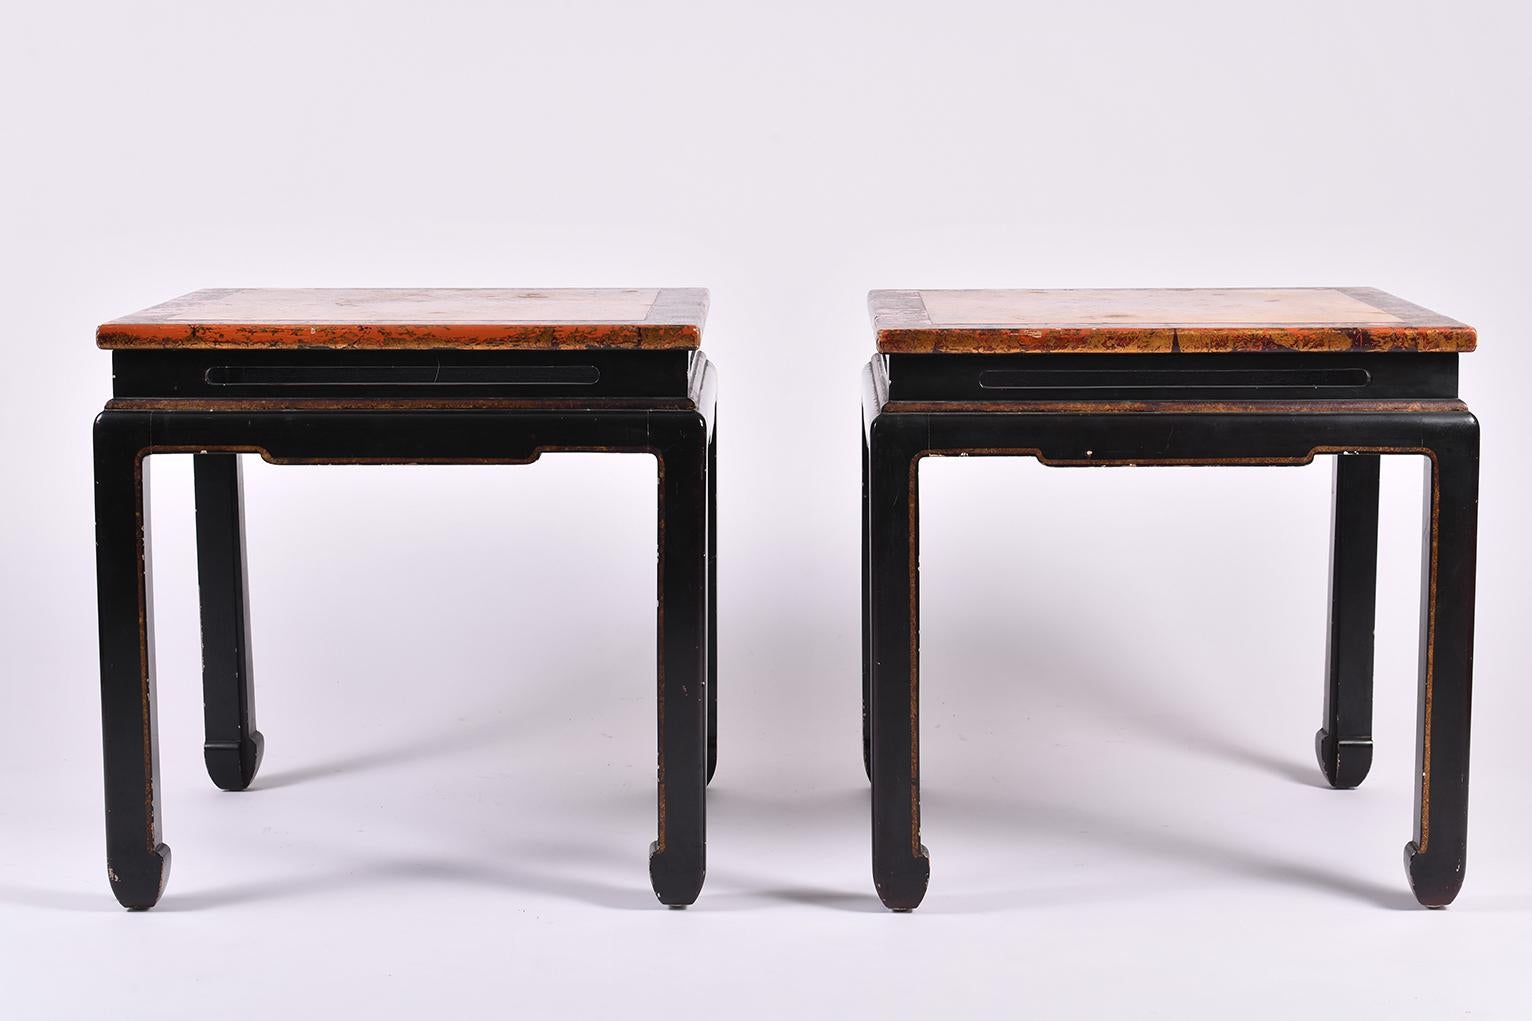 A pair of Chinese export black and red lacquer, gilded and painted top side tables
with open carved apron and stylized horse hoof feet
China, circa 1950.